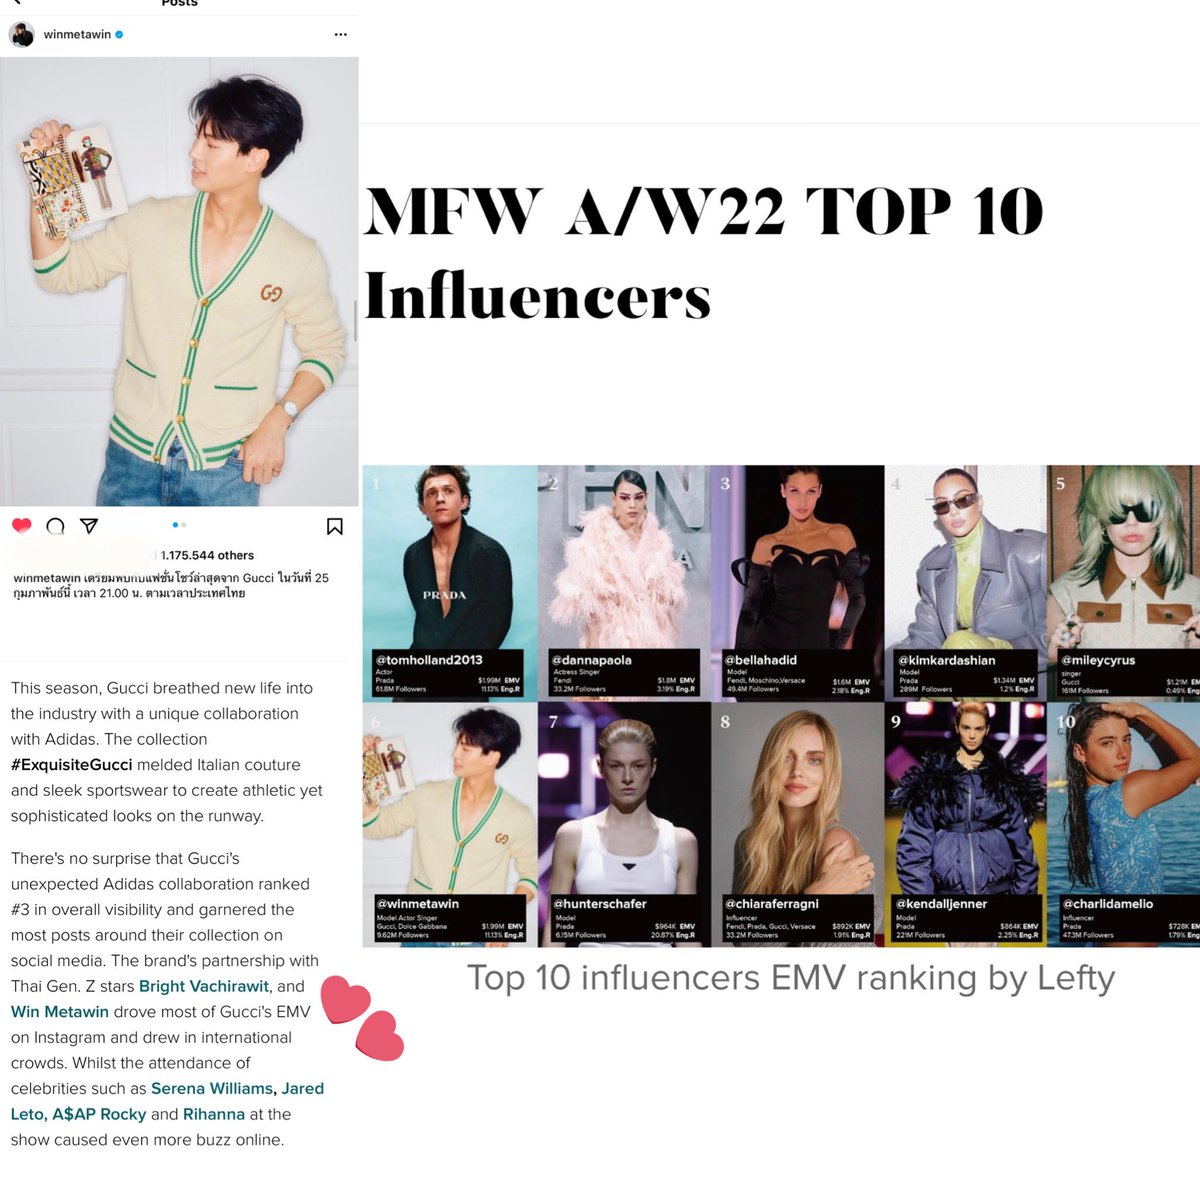 Congrats @winmetawin 👏🏻🥳💚

Raking 6 in among Top 10 Influencers EMV for Men's Fashion Week 
Autumn/Winter 2022 with his Instagram post of #ExquisiteGucci campaign. MILAN true 😳
👉🏻 link lefty.io//blog/who-stol…
#winmetawin 
@gucci #Gucci